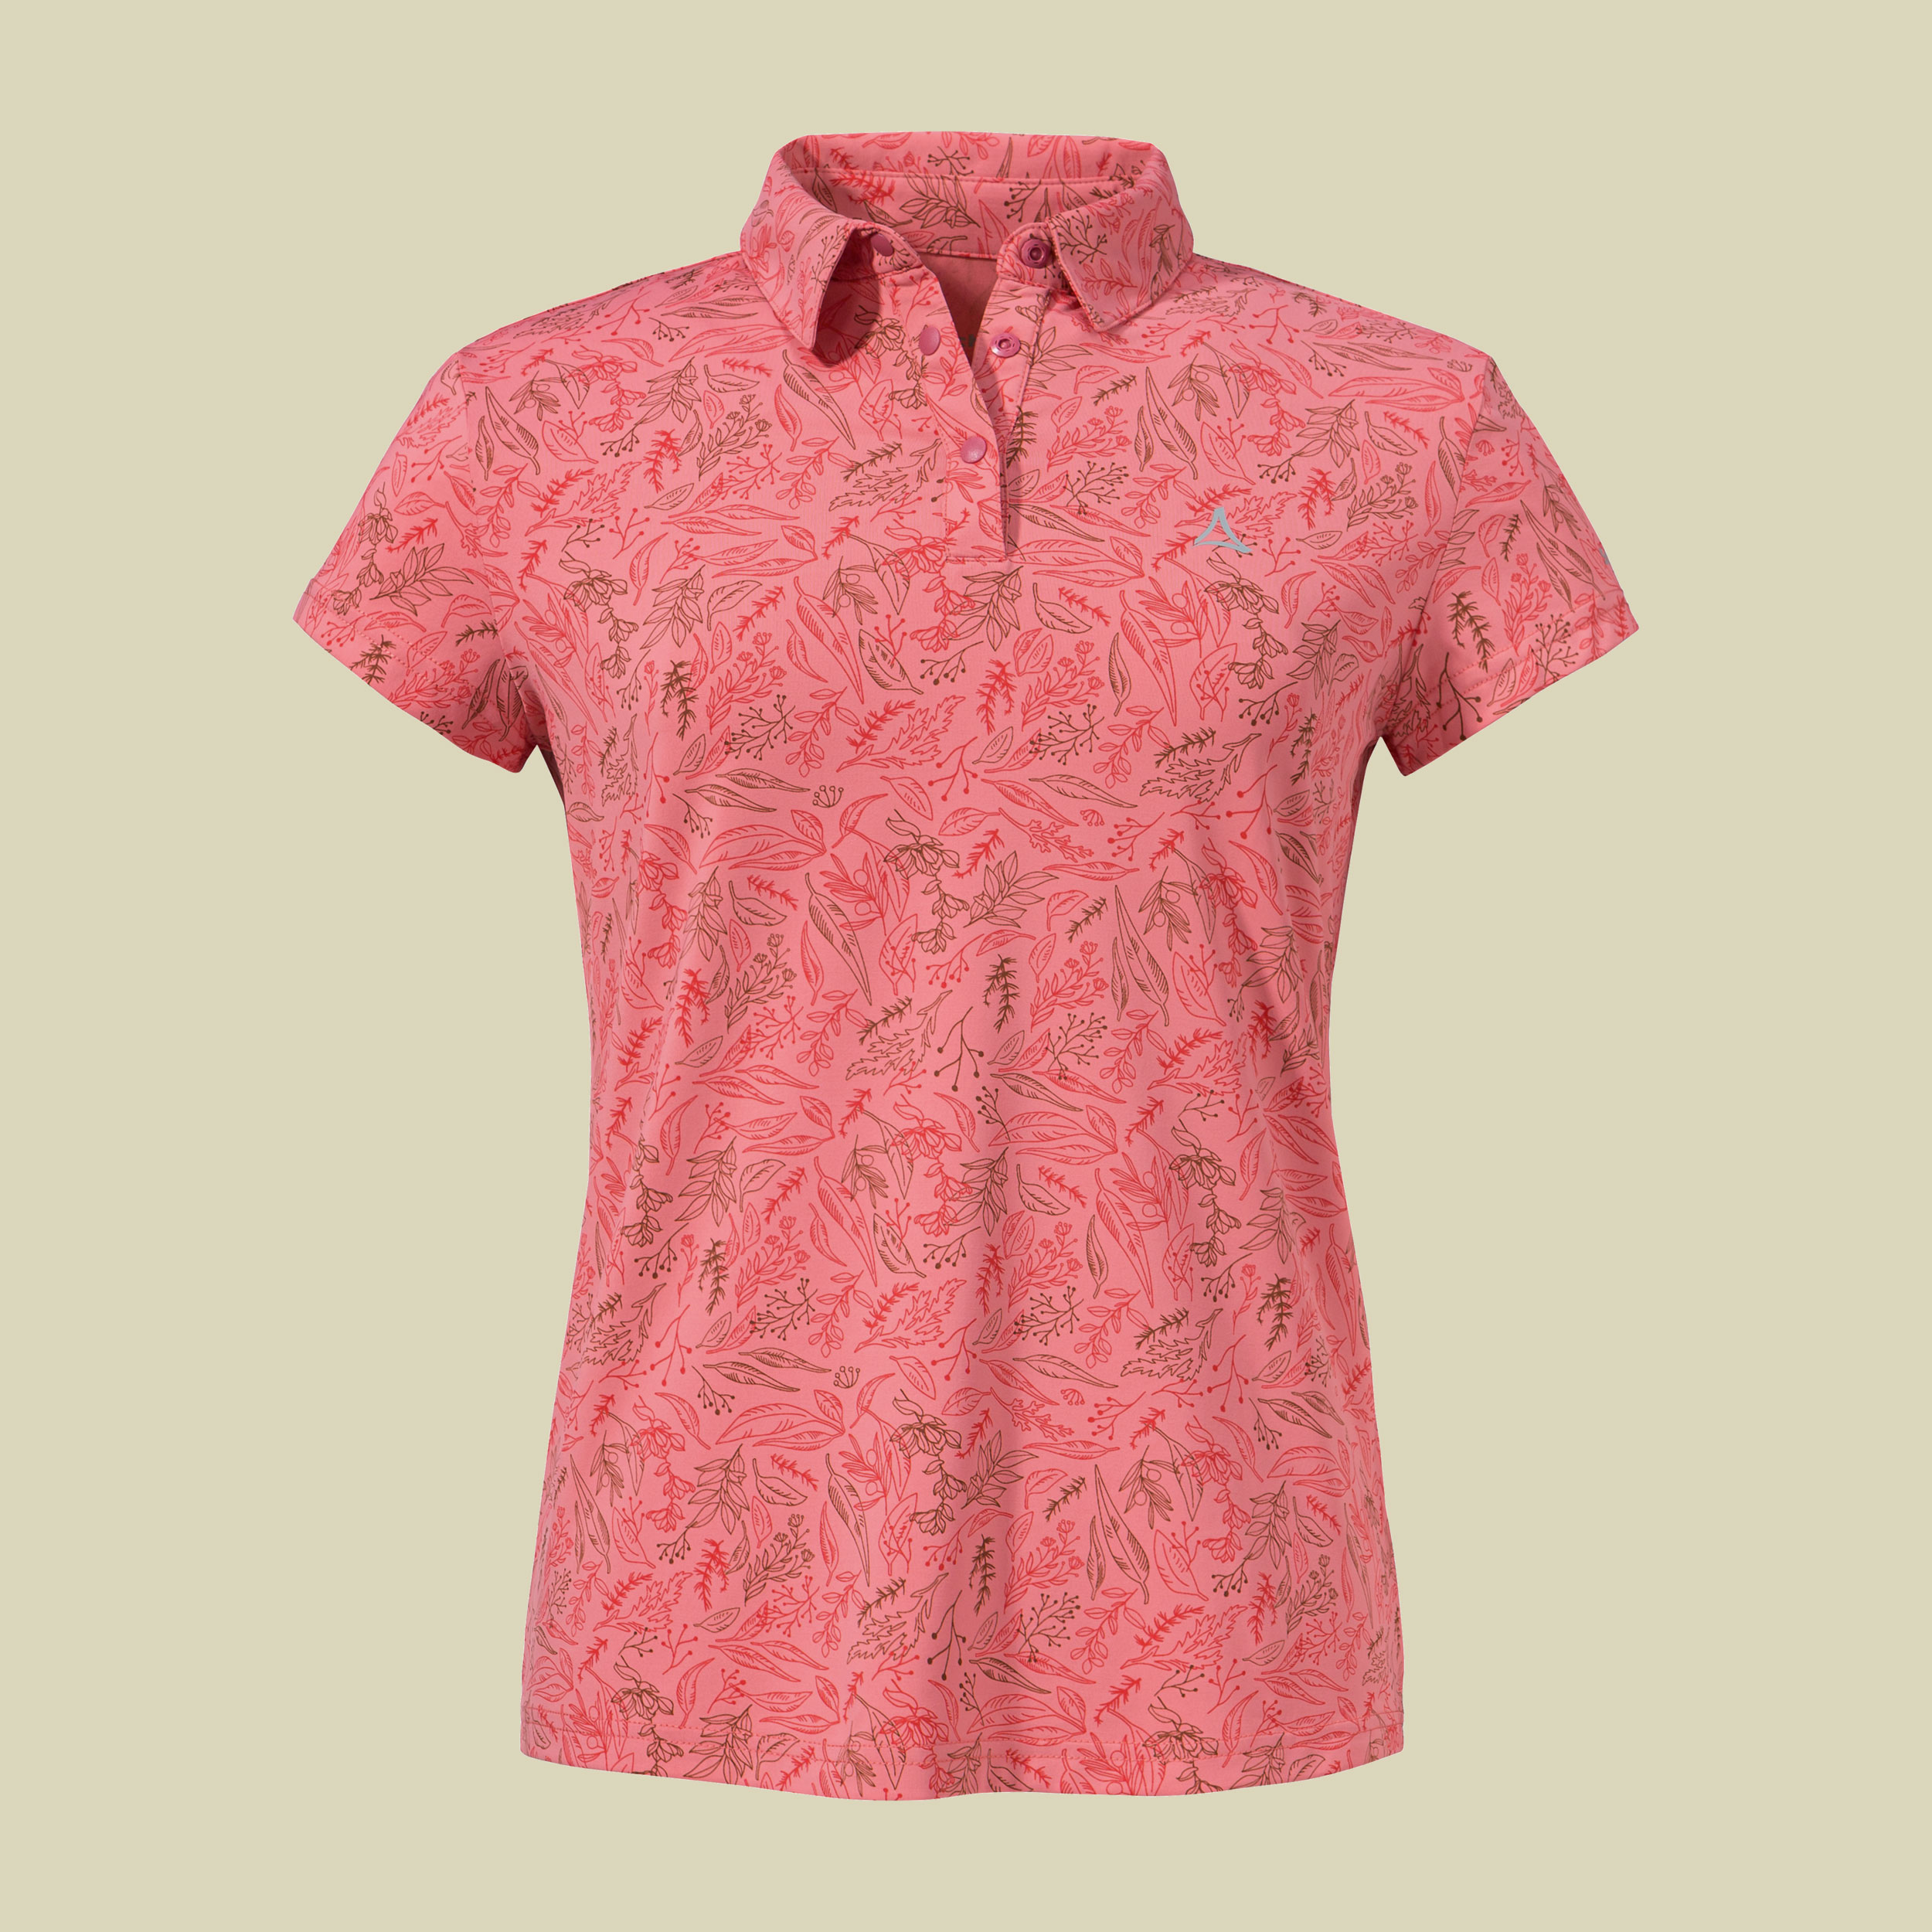 Polo Shirt Sternplatte L Women 42 rot - clasping rose